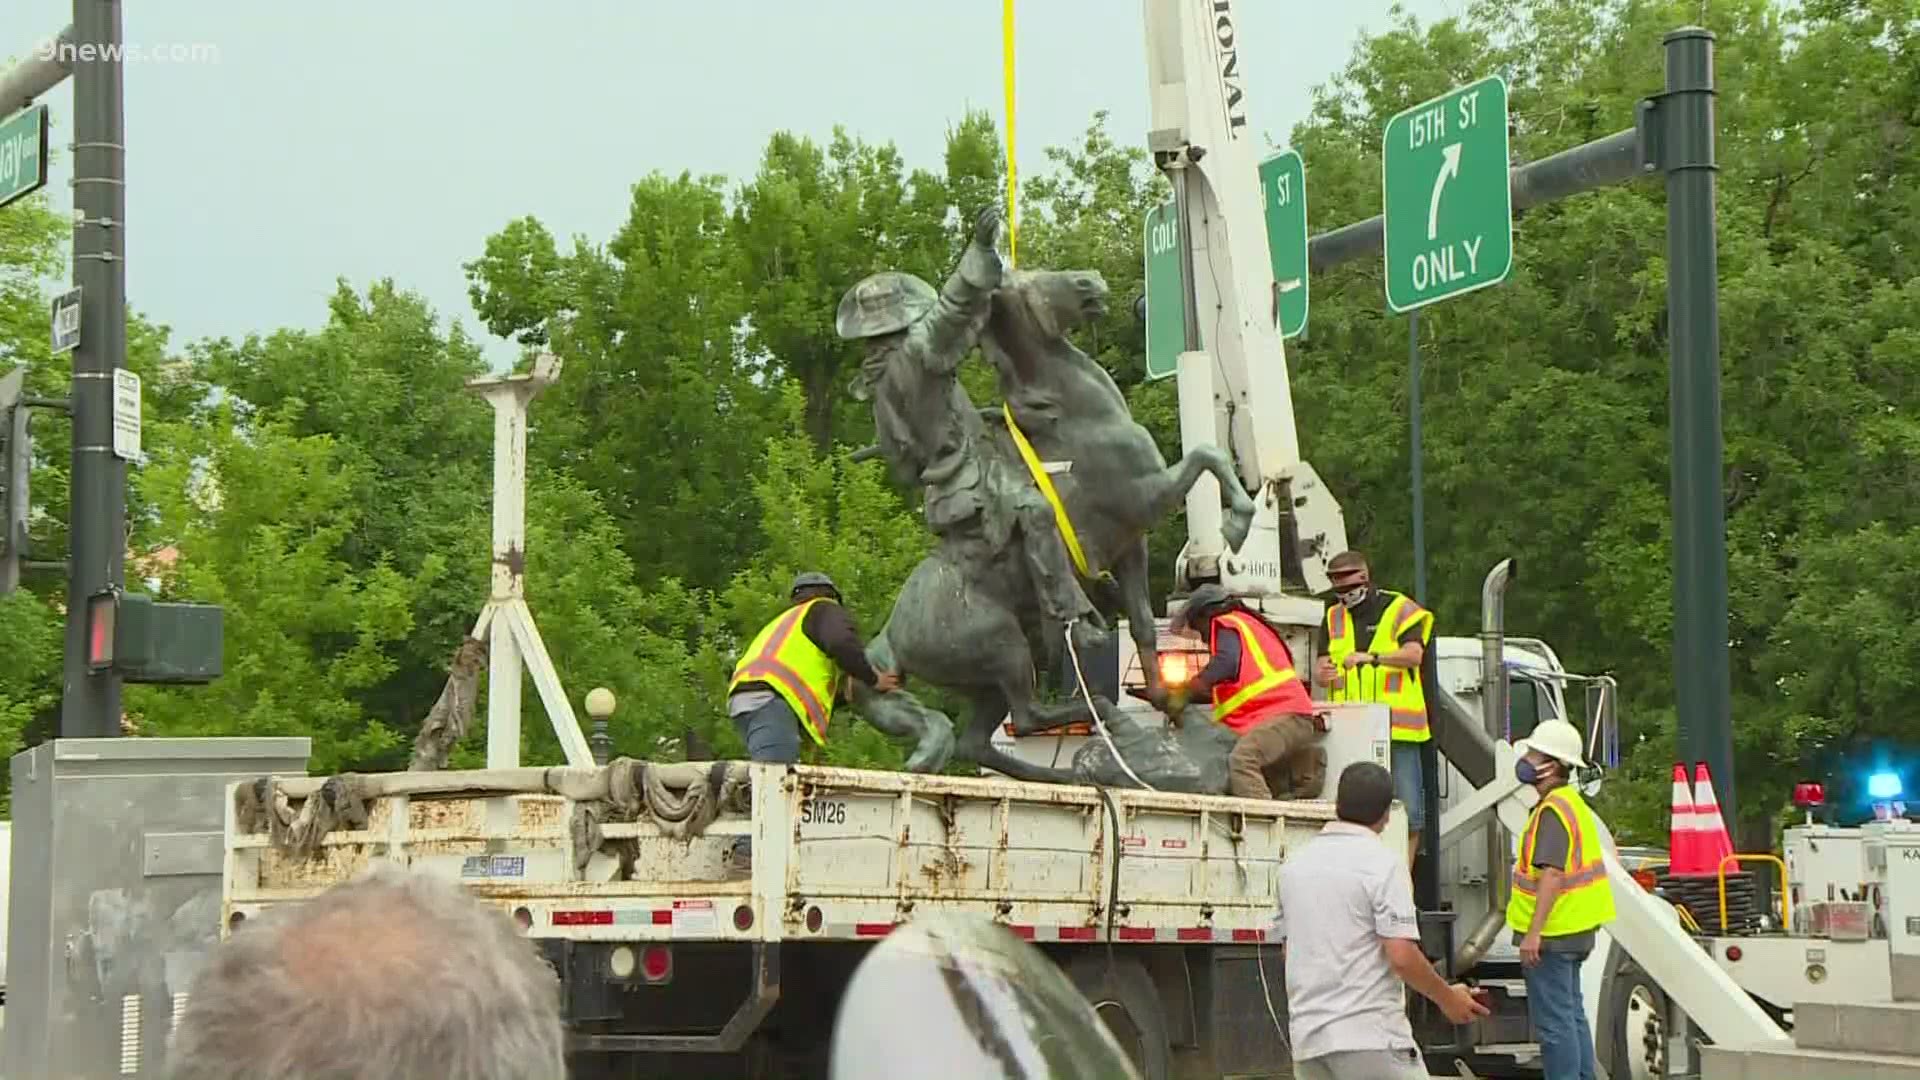 The statue was removed after two other statues in downtown Denver were toppled.